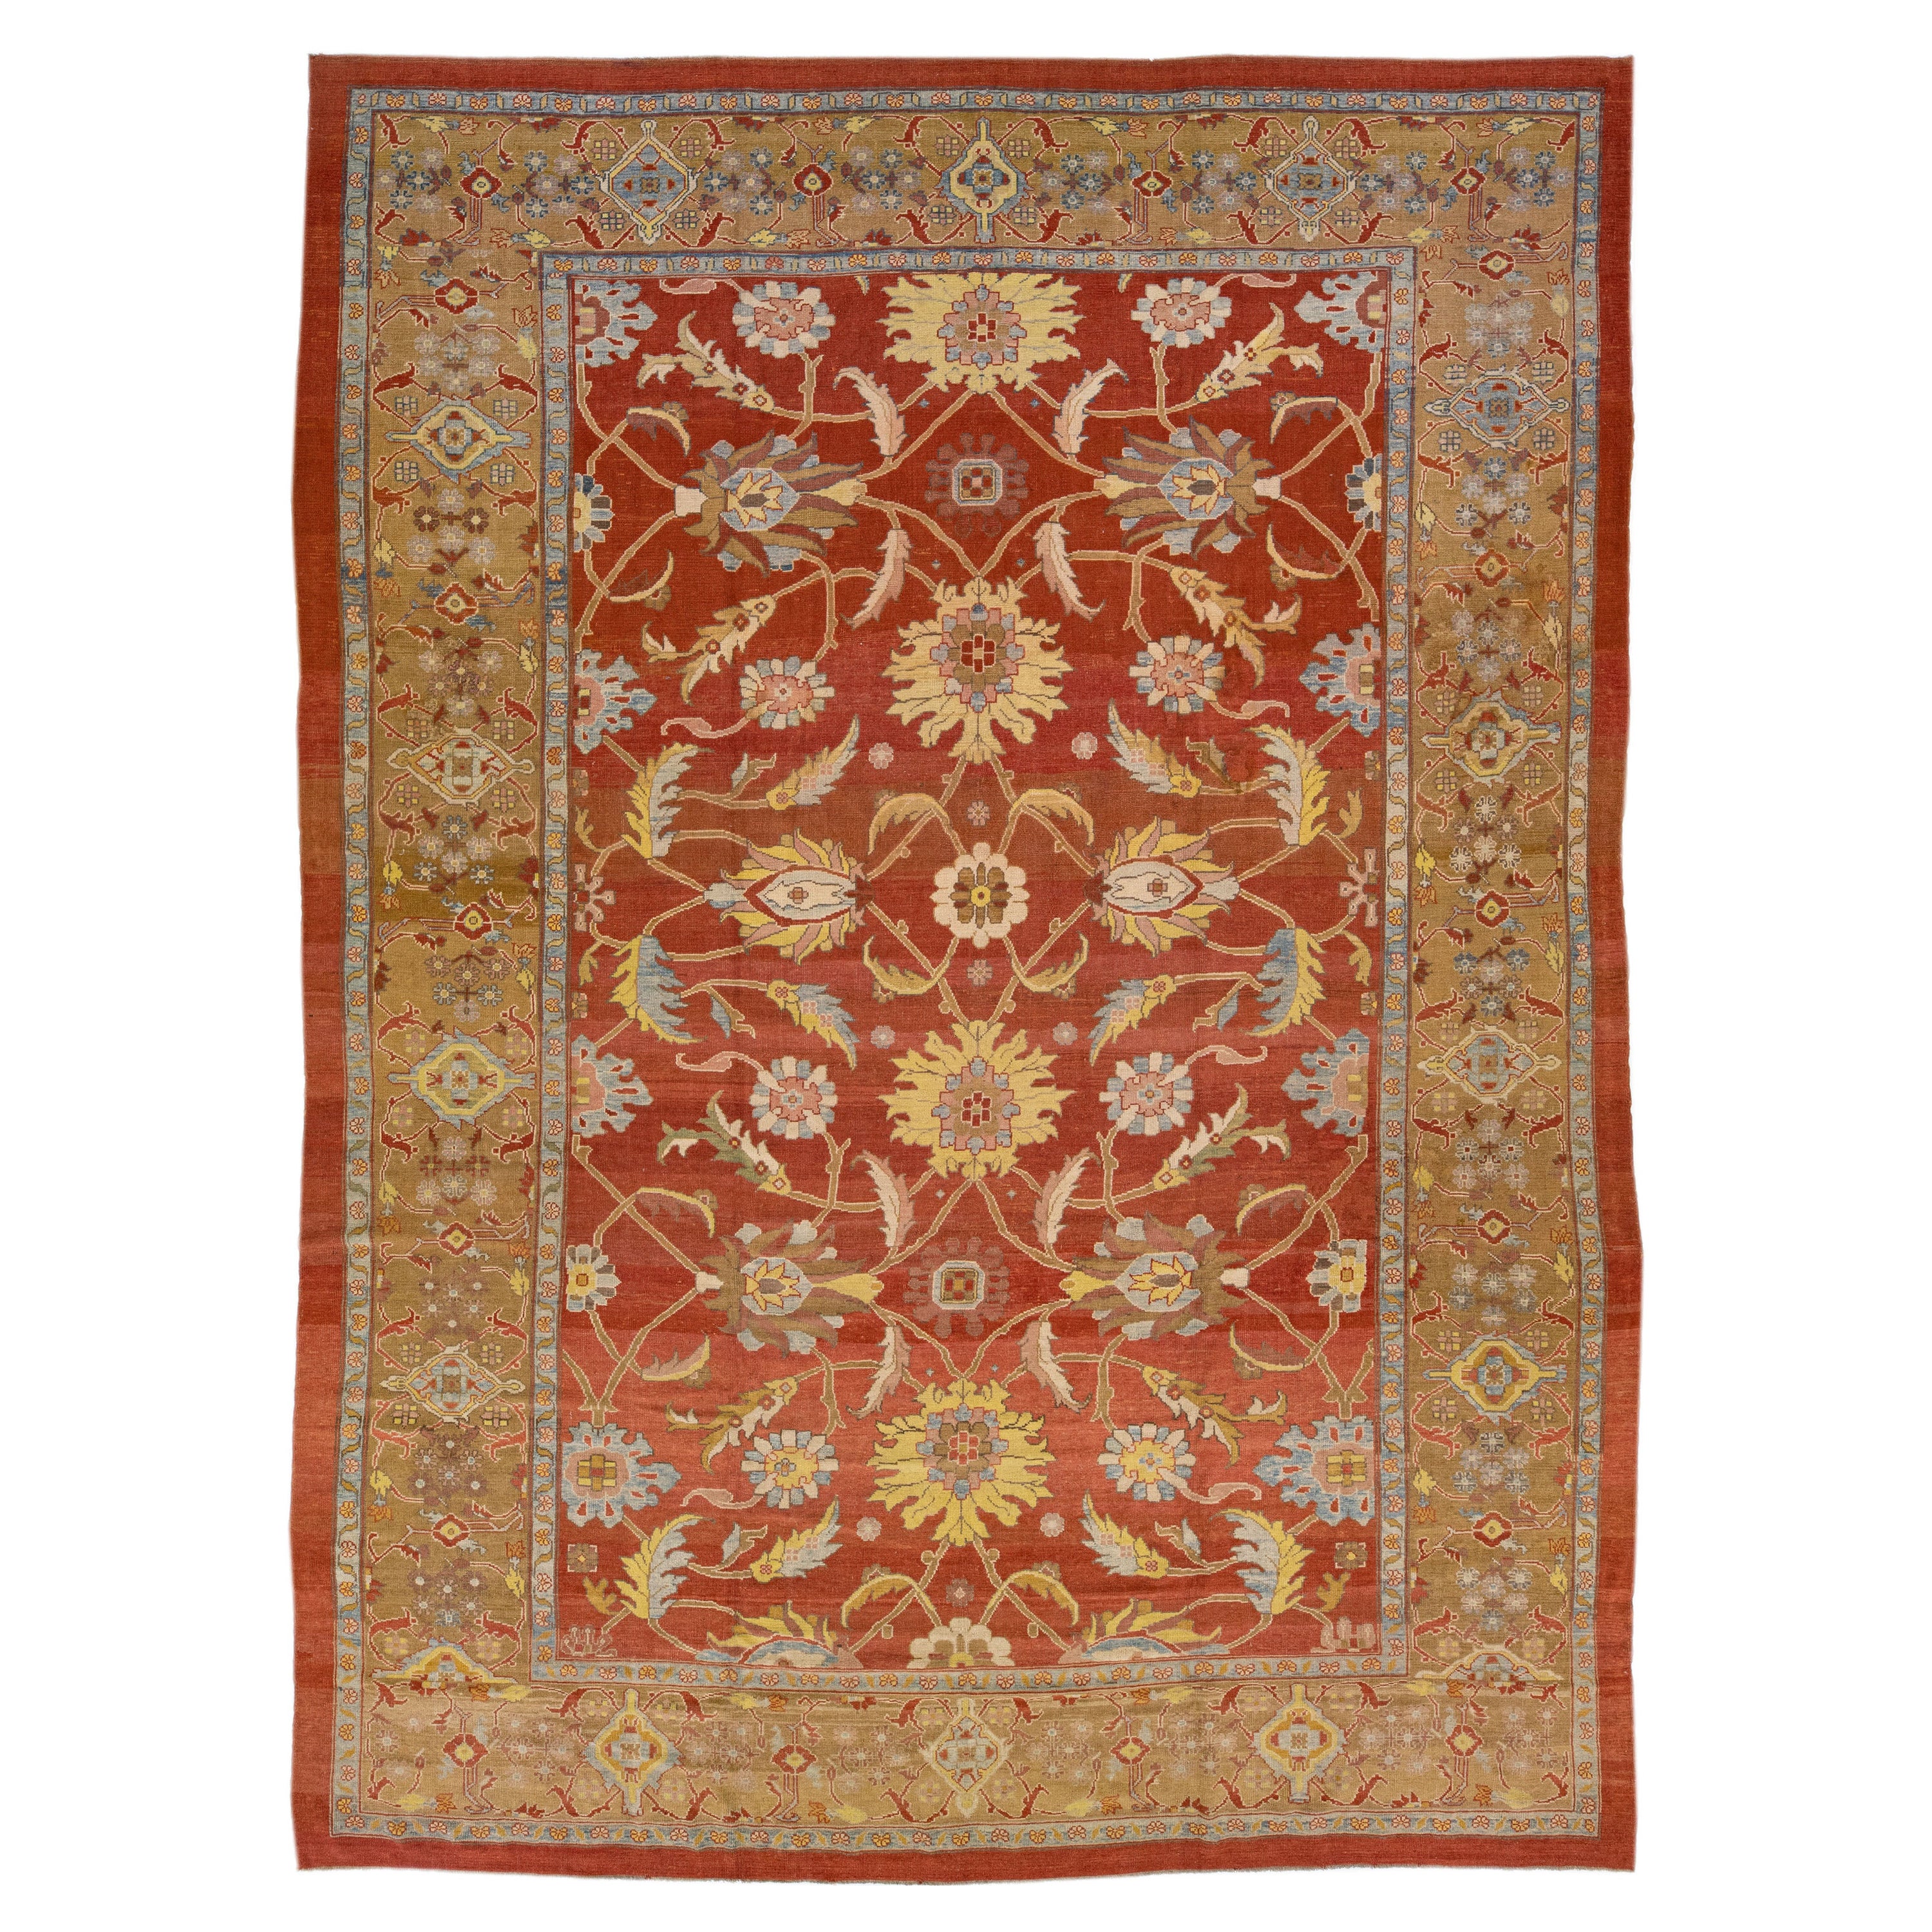 Modern Floral Sultanabad Handmade Persian Wool Rug in Red-Rust Color 